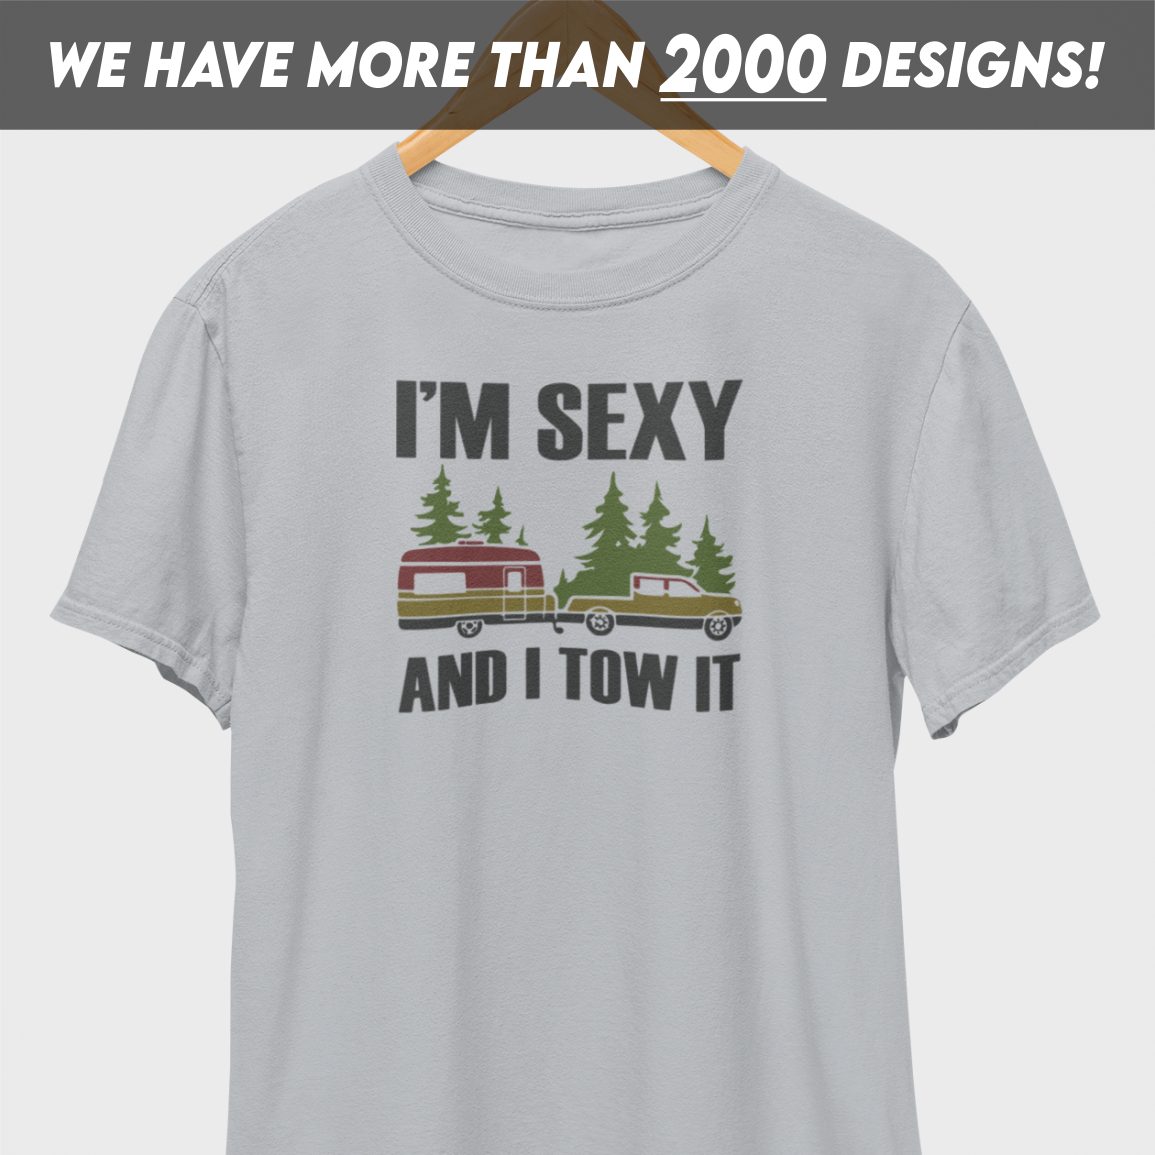 I'm Sexy And I Tow It T-Shirt